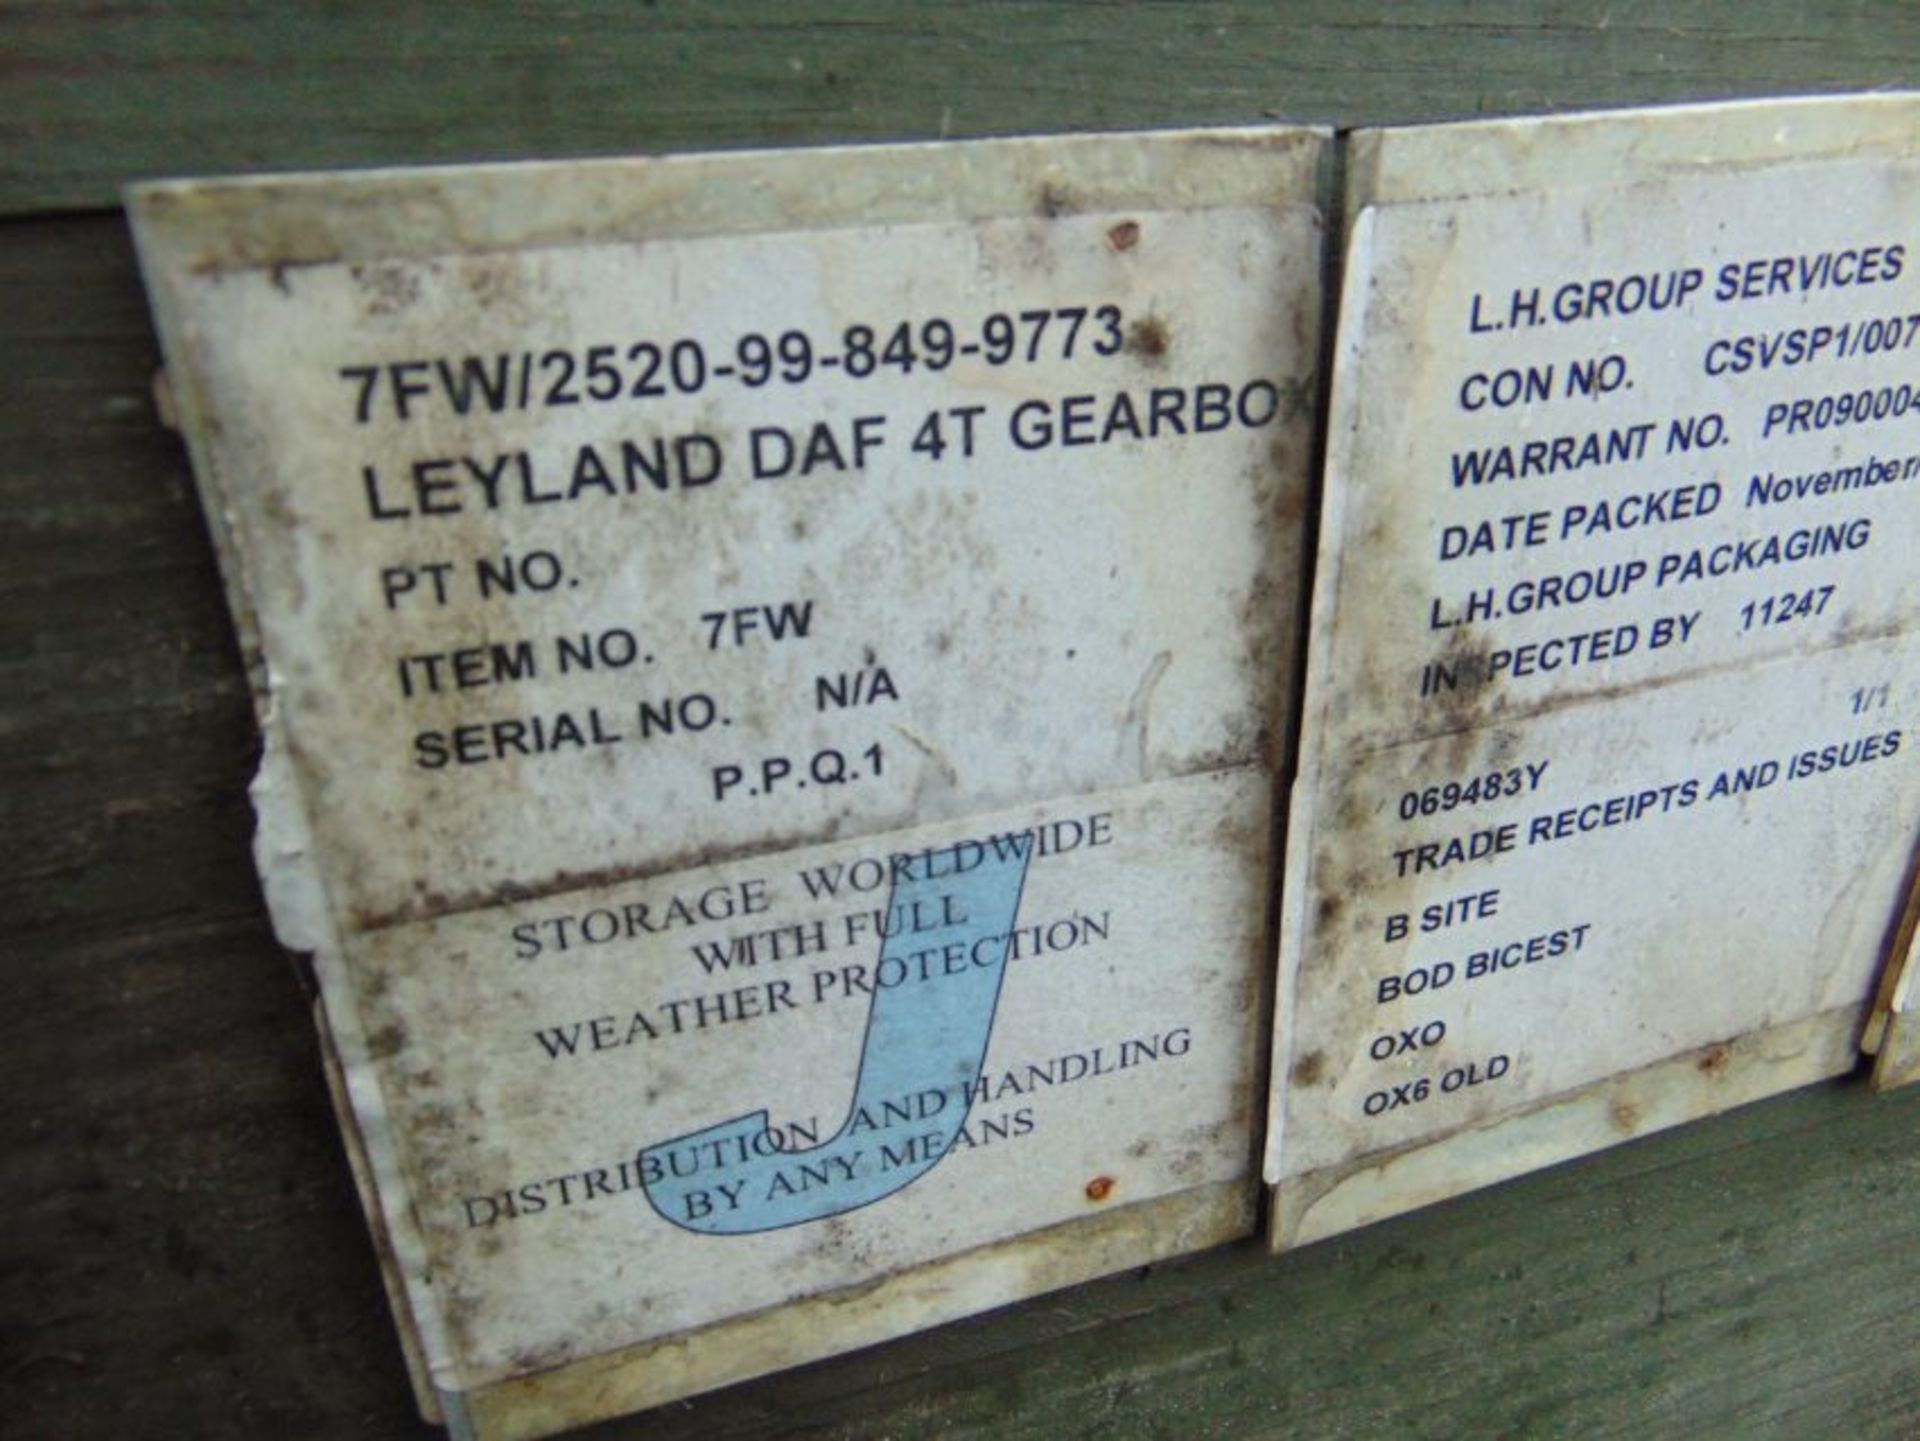 Leyland Daf 4 tonne Gearbox Army Recon A1 Complete as shown - Image 3 of 3